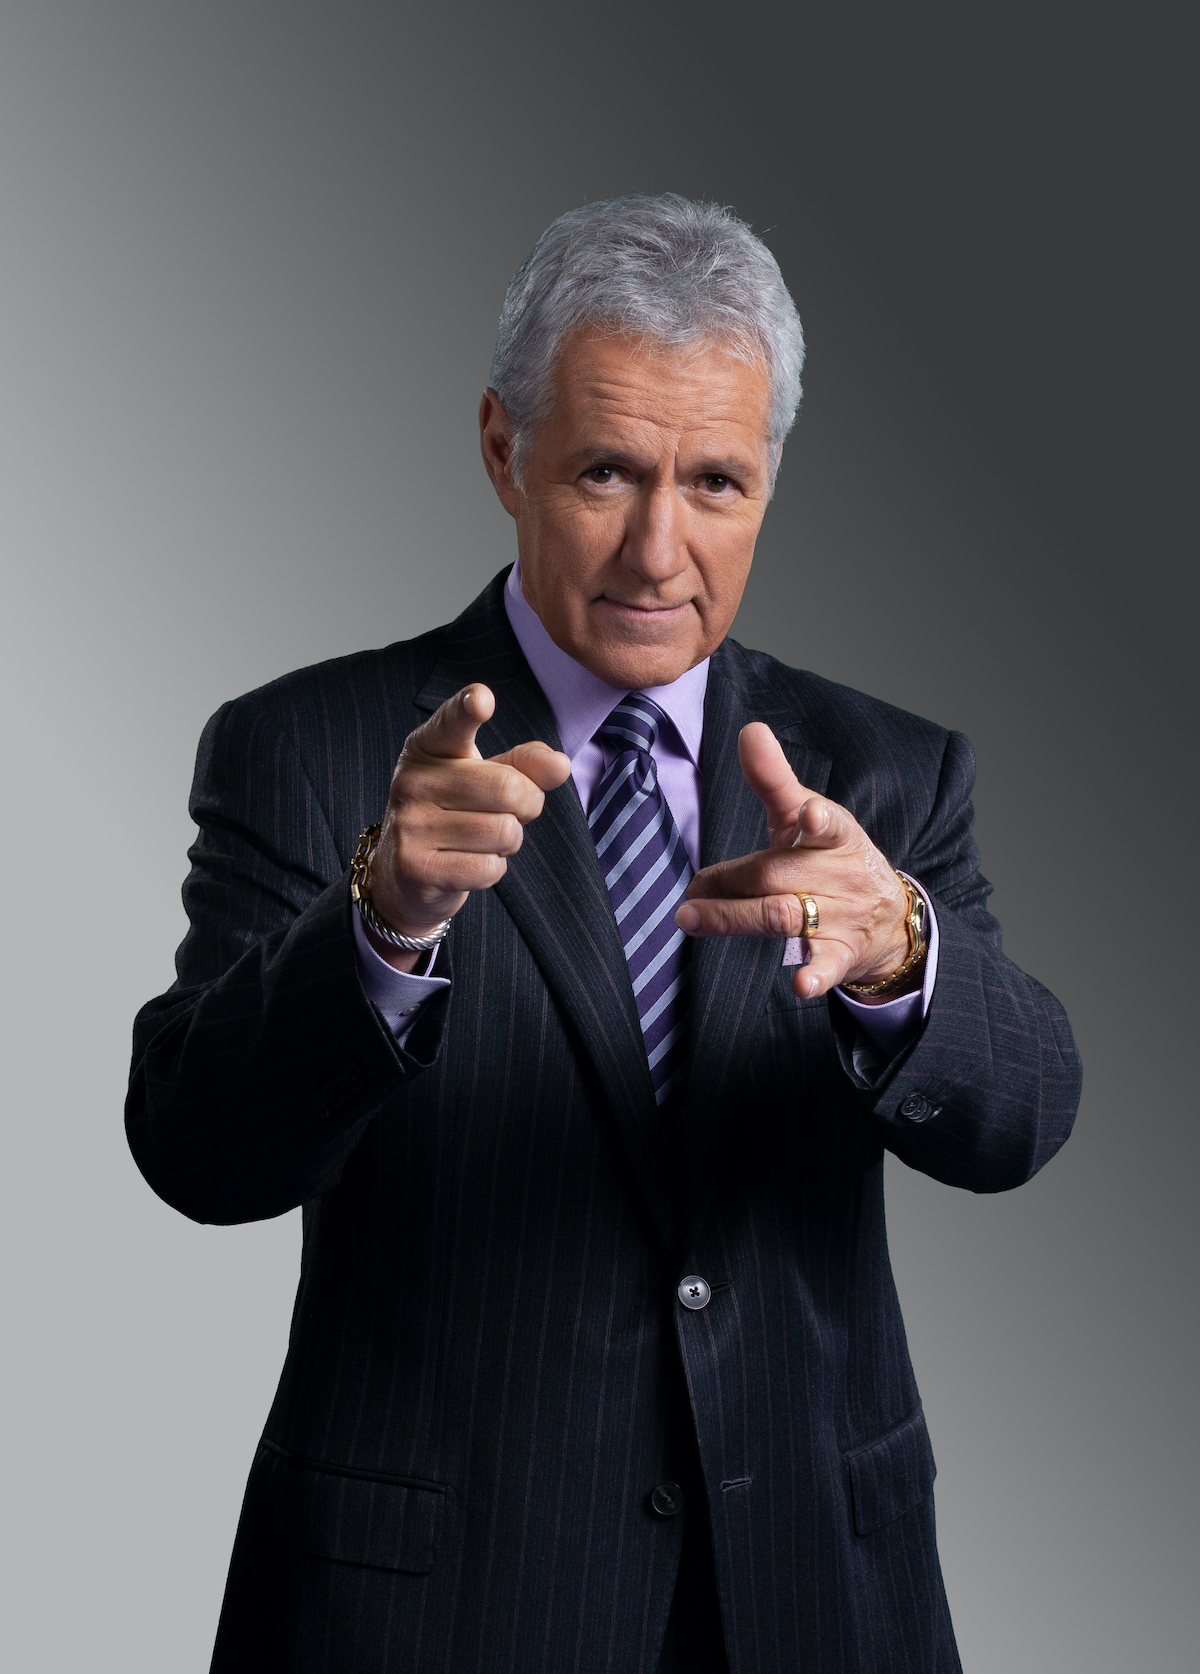 Alex Trebek the host of the TV game show "Jeopardy" arrives at the annual White Correspondents Dinner at the Washington Hilton Hotel in 2006